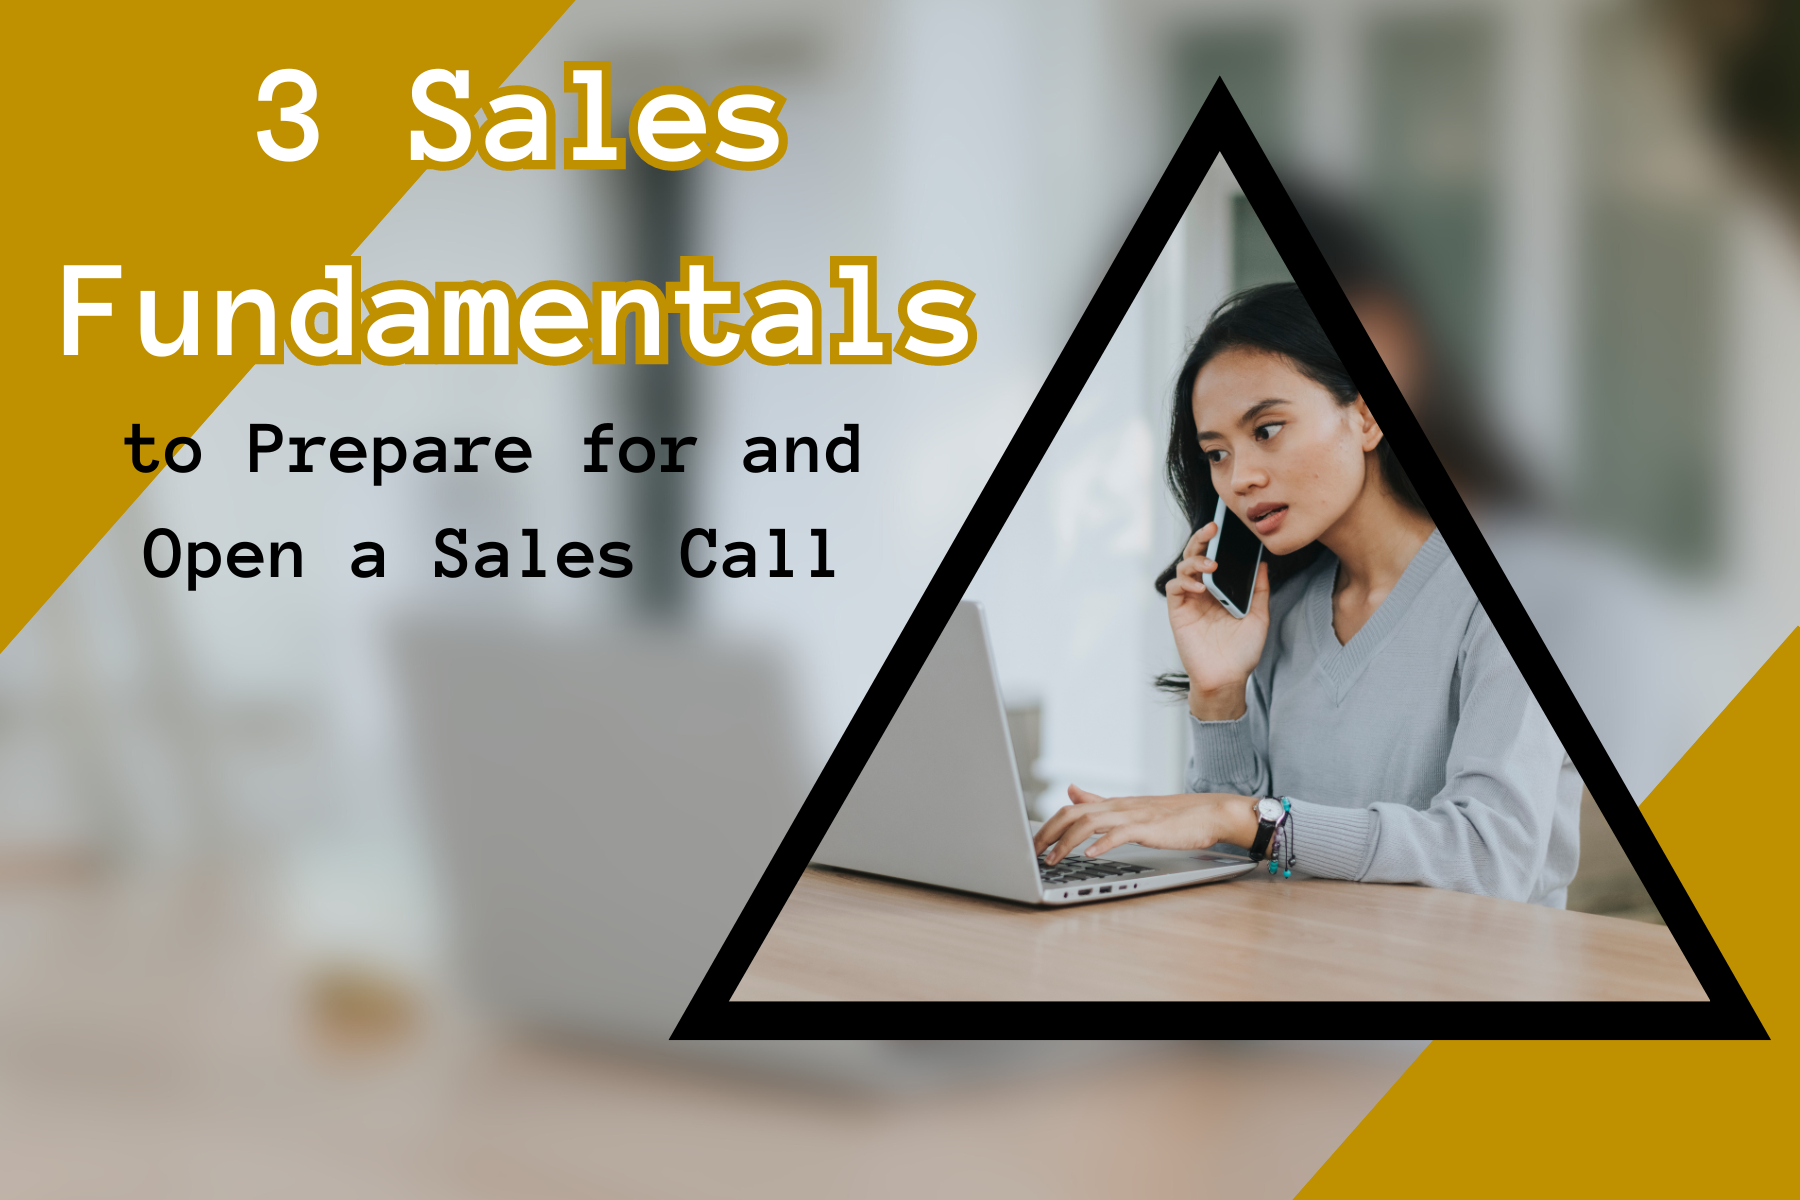 3 Sales Fundamentals to Prepare for and Open a Sales Call